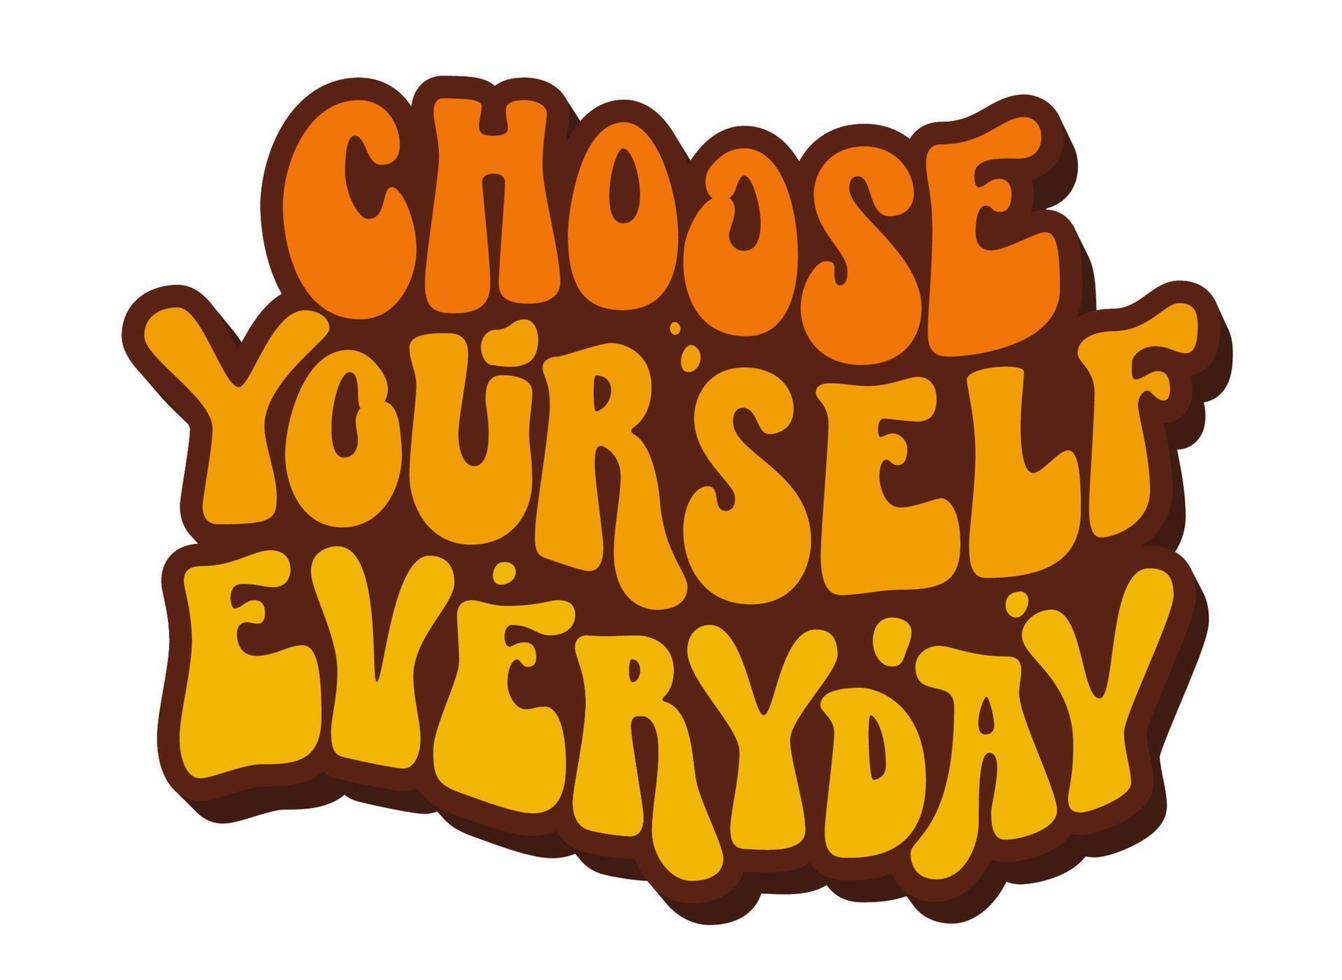 Cartoon lettering with choose yourself everyday groovy lettering. vector